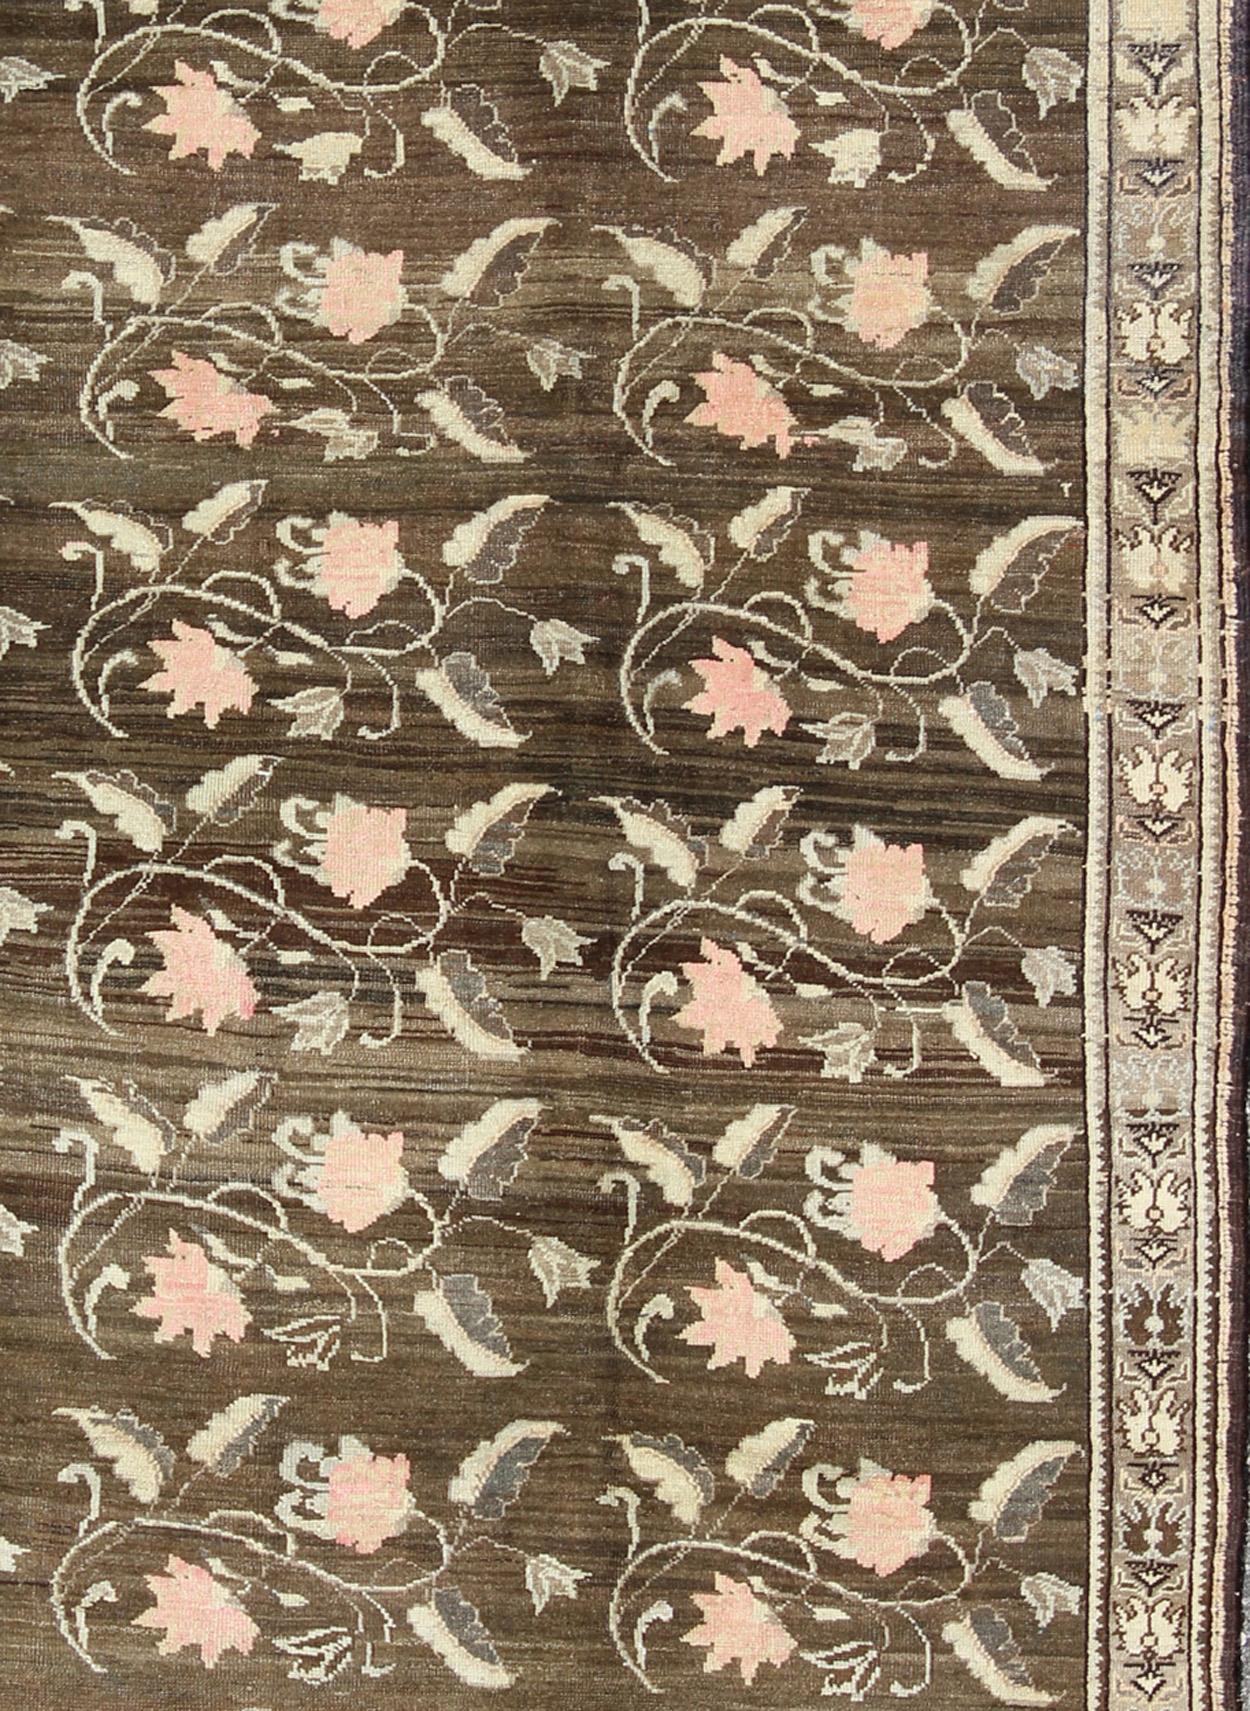 Measures: 7'5 x 11'4

Set on a dark greenish-brown background, the all-encompassing floral pattern of this vintage Turkish Kars is unique. The pale pink and peach-colored roses featured in this unique piece are accompanied by light green leaves